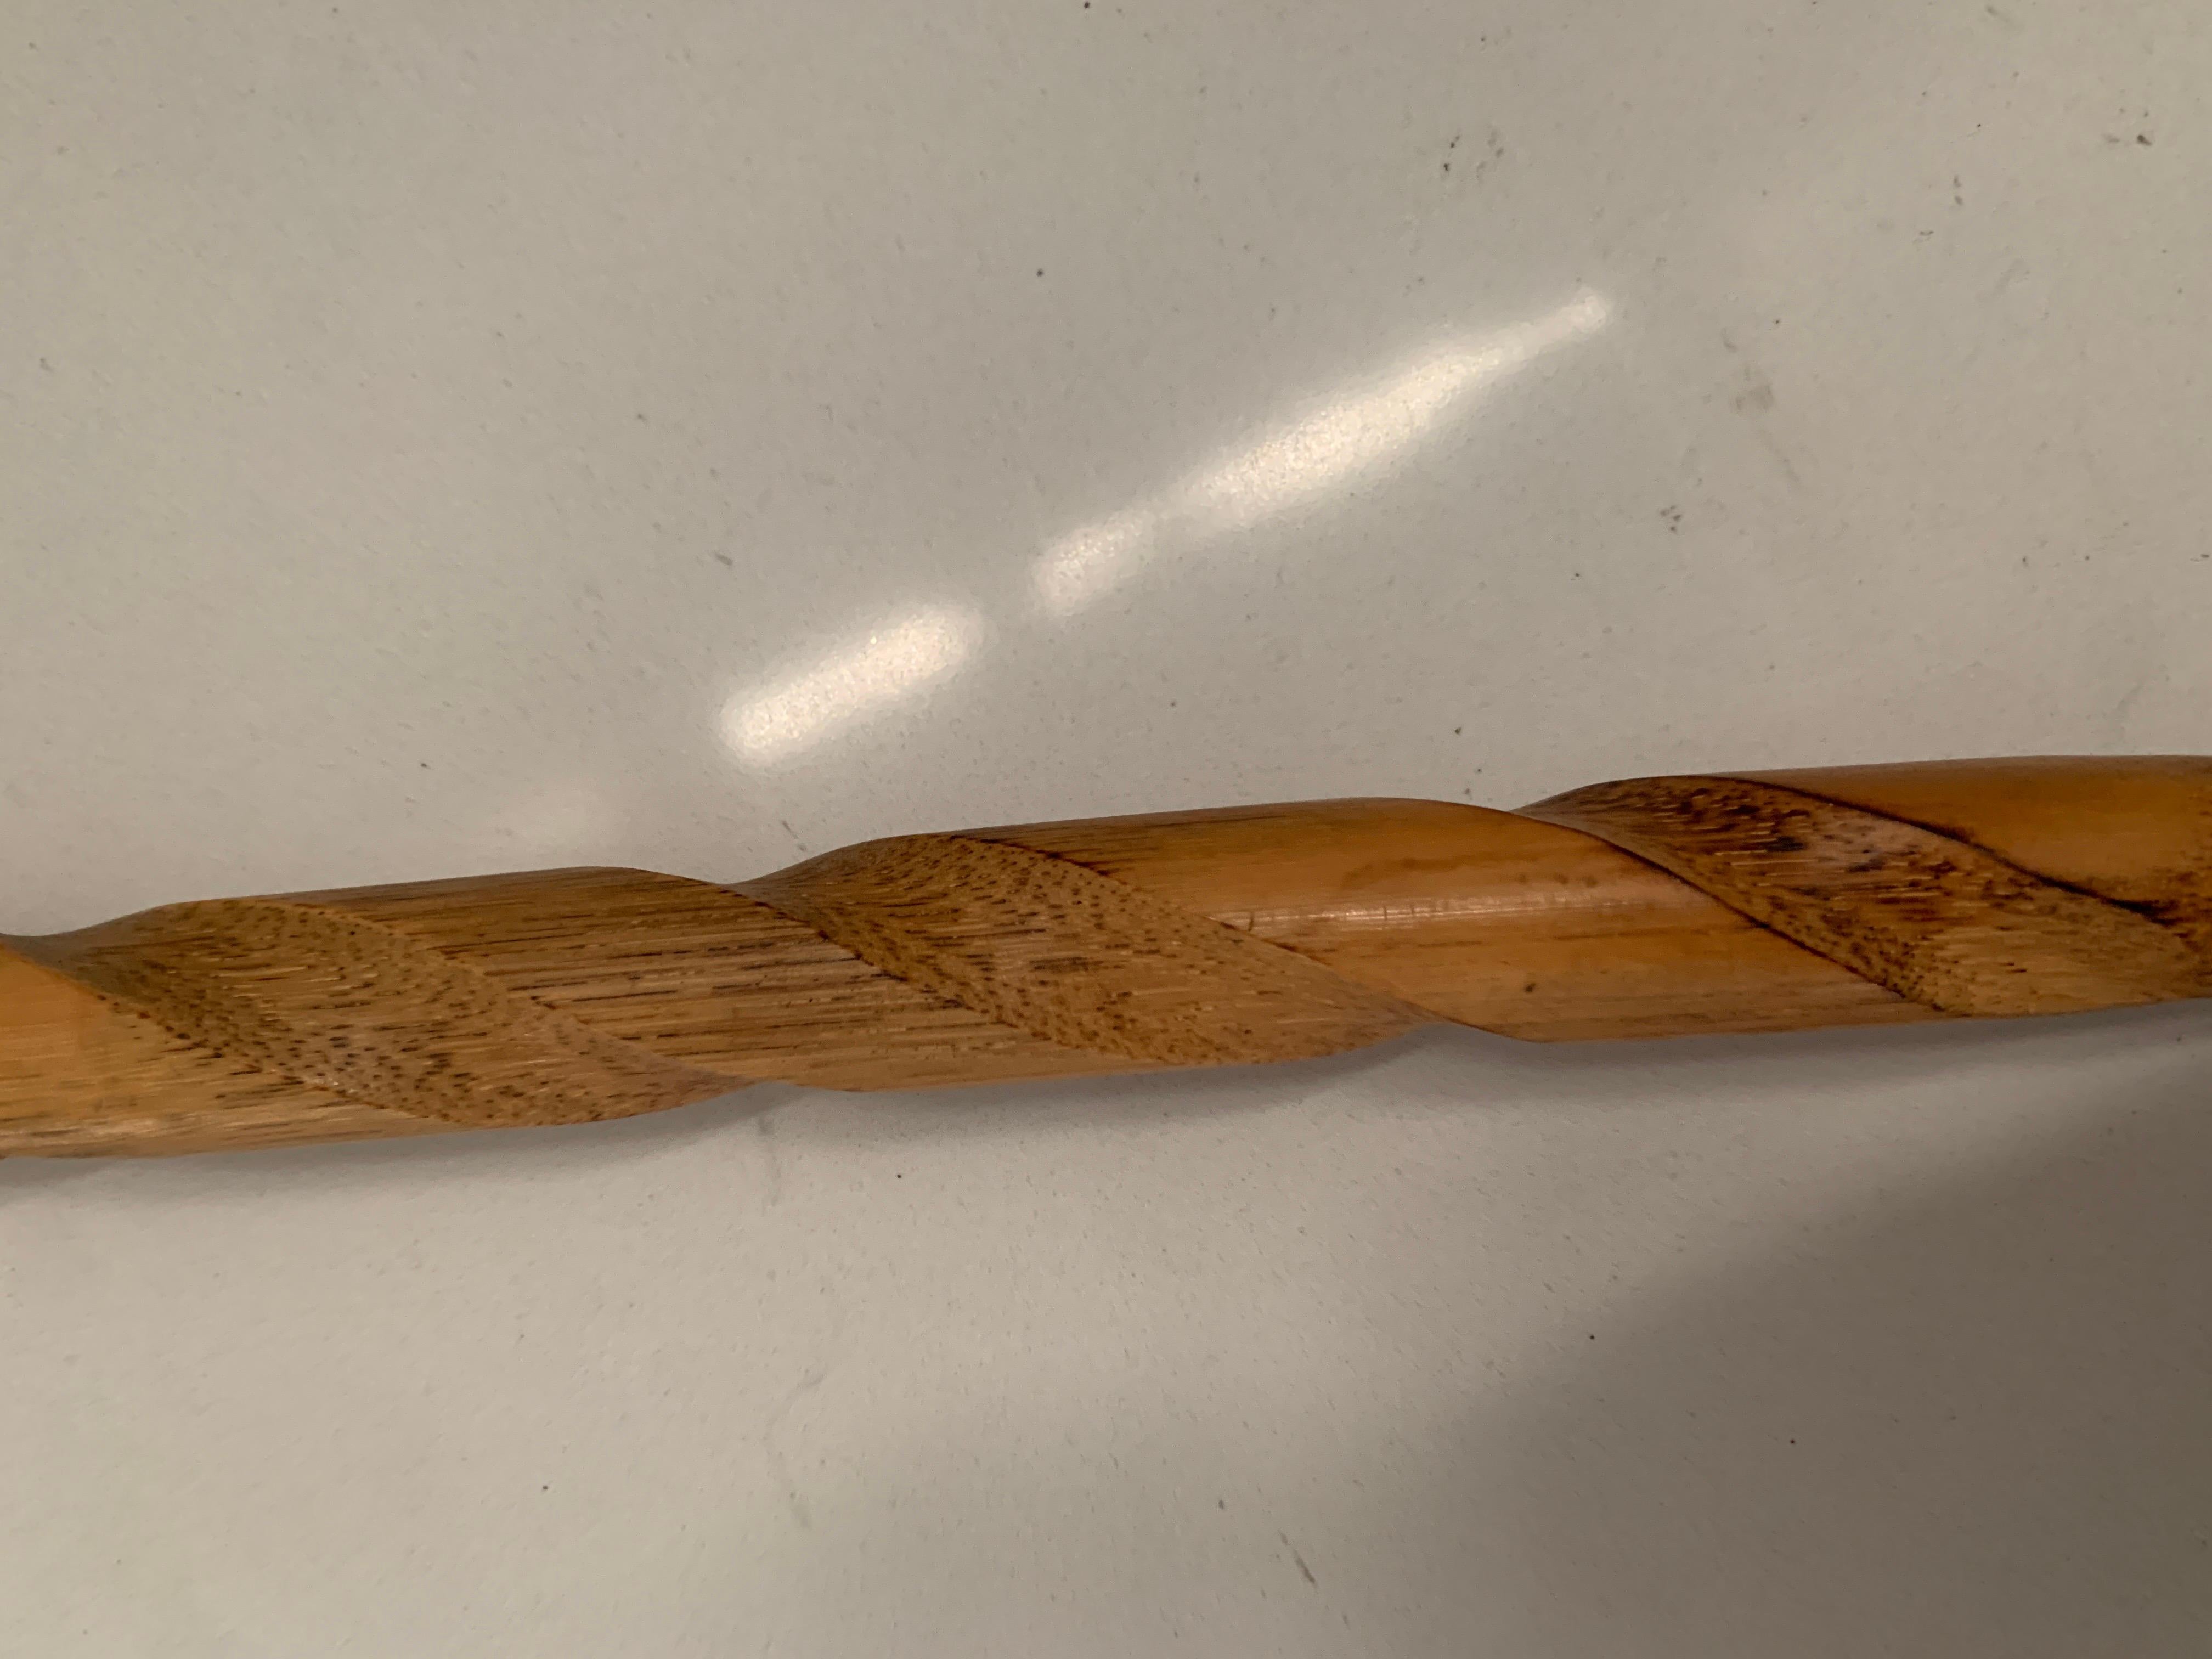 A delightful shoe horn with a dog head depiction atop. The piece is wood with an acrylic Tortoise look horn and dog handle. The piece is quite long and has a small eye loop for hanging. A nice addition to the dressing or mud room.